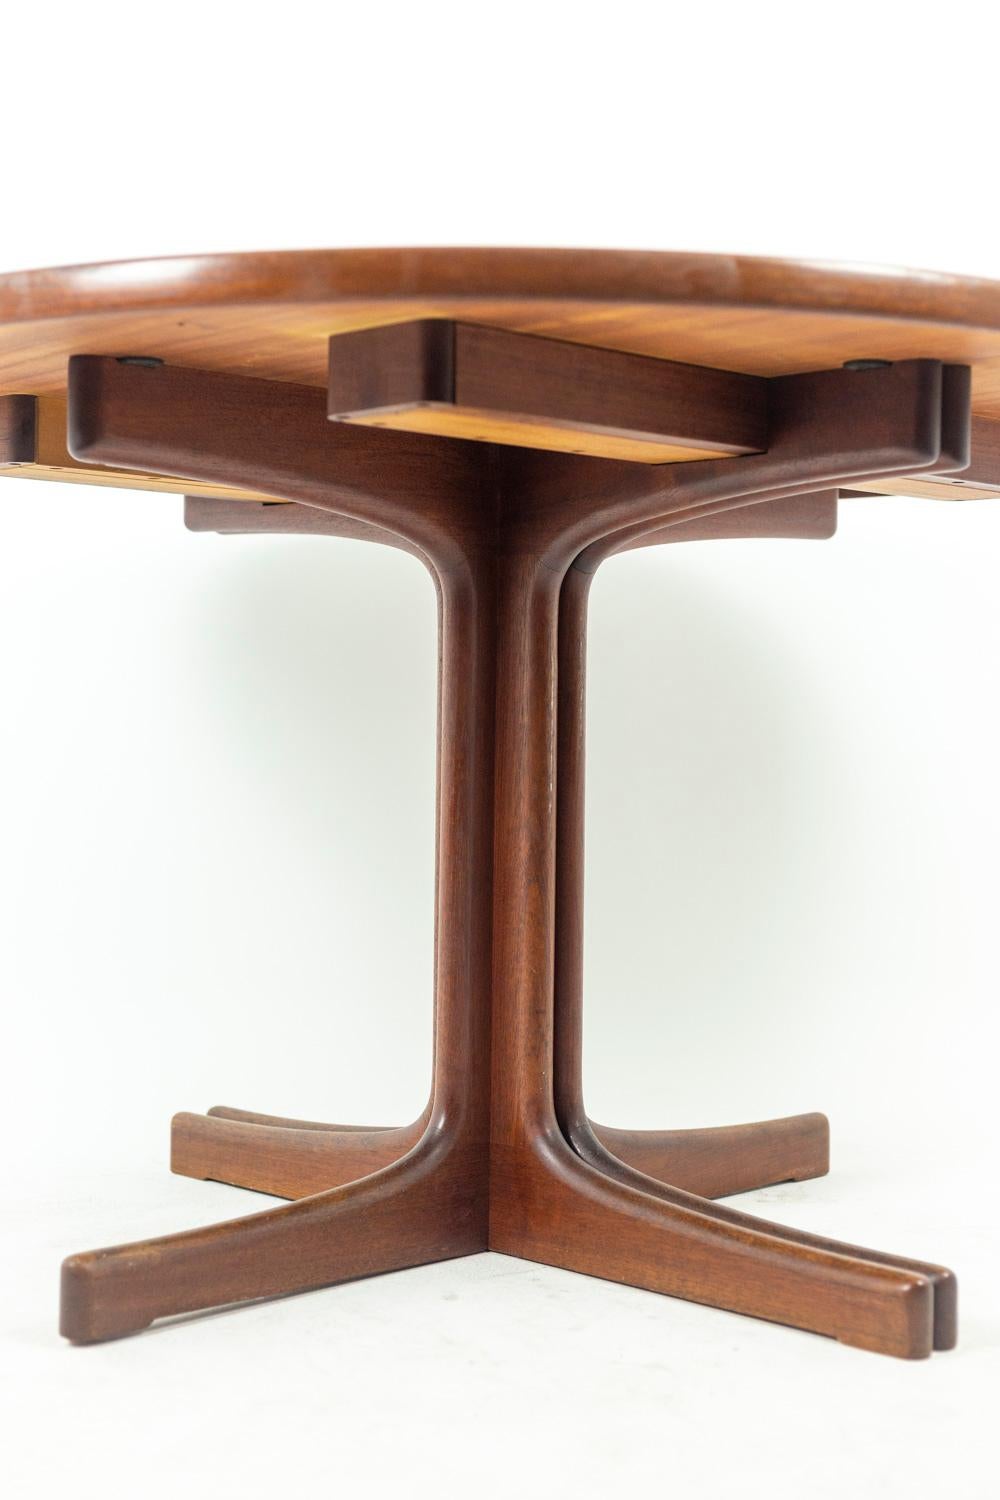 Late 20th Century Scandinavian Dining Table in Teak, 1970s For Sale